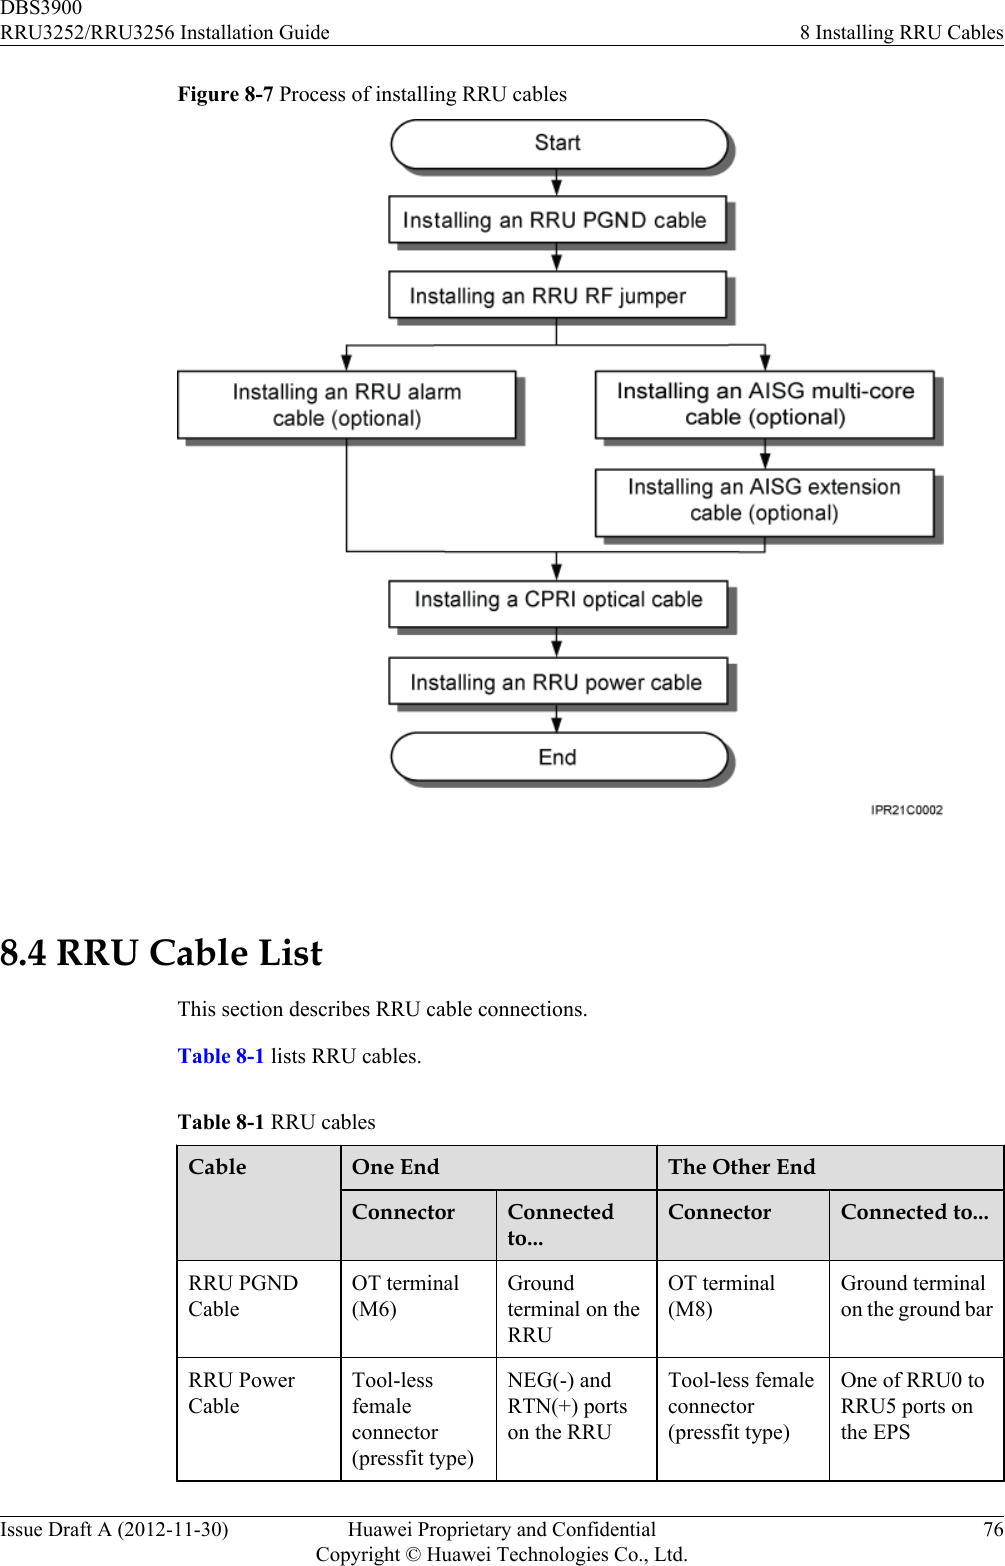 Figure 8-7 Process of installing RRU cables 8.4 RRU Cable ListThis section describes RRU cable connections.Table 8-1 lists RRU cables.Table 8-1 RRU cablesCable One End The Other EndConnector Connectedto...Connector Connected to...RRU PGNDCableOT terminal(M6)Groundterminal on theRRUOT terminal(M8)Ground terminalon the ground barRRU PowerCableTool-lessfemaleconnector(pressfit type)NEG(-) andRTN(+) portson the RRUTool-less femaleconnector(pressfit type)One of RRU0 toRRU5 ports onthe EPSDBS3900RRU3252/RRU3256 Installation Guide 8 Installing RRU CablesIssue Draft A (2012-11-30) Huawei Proprietary and ConfidentialCopyright © Huawei Technologies Co., Ltd.76